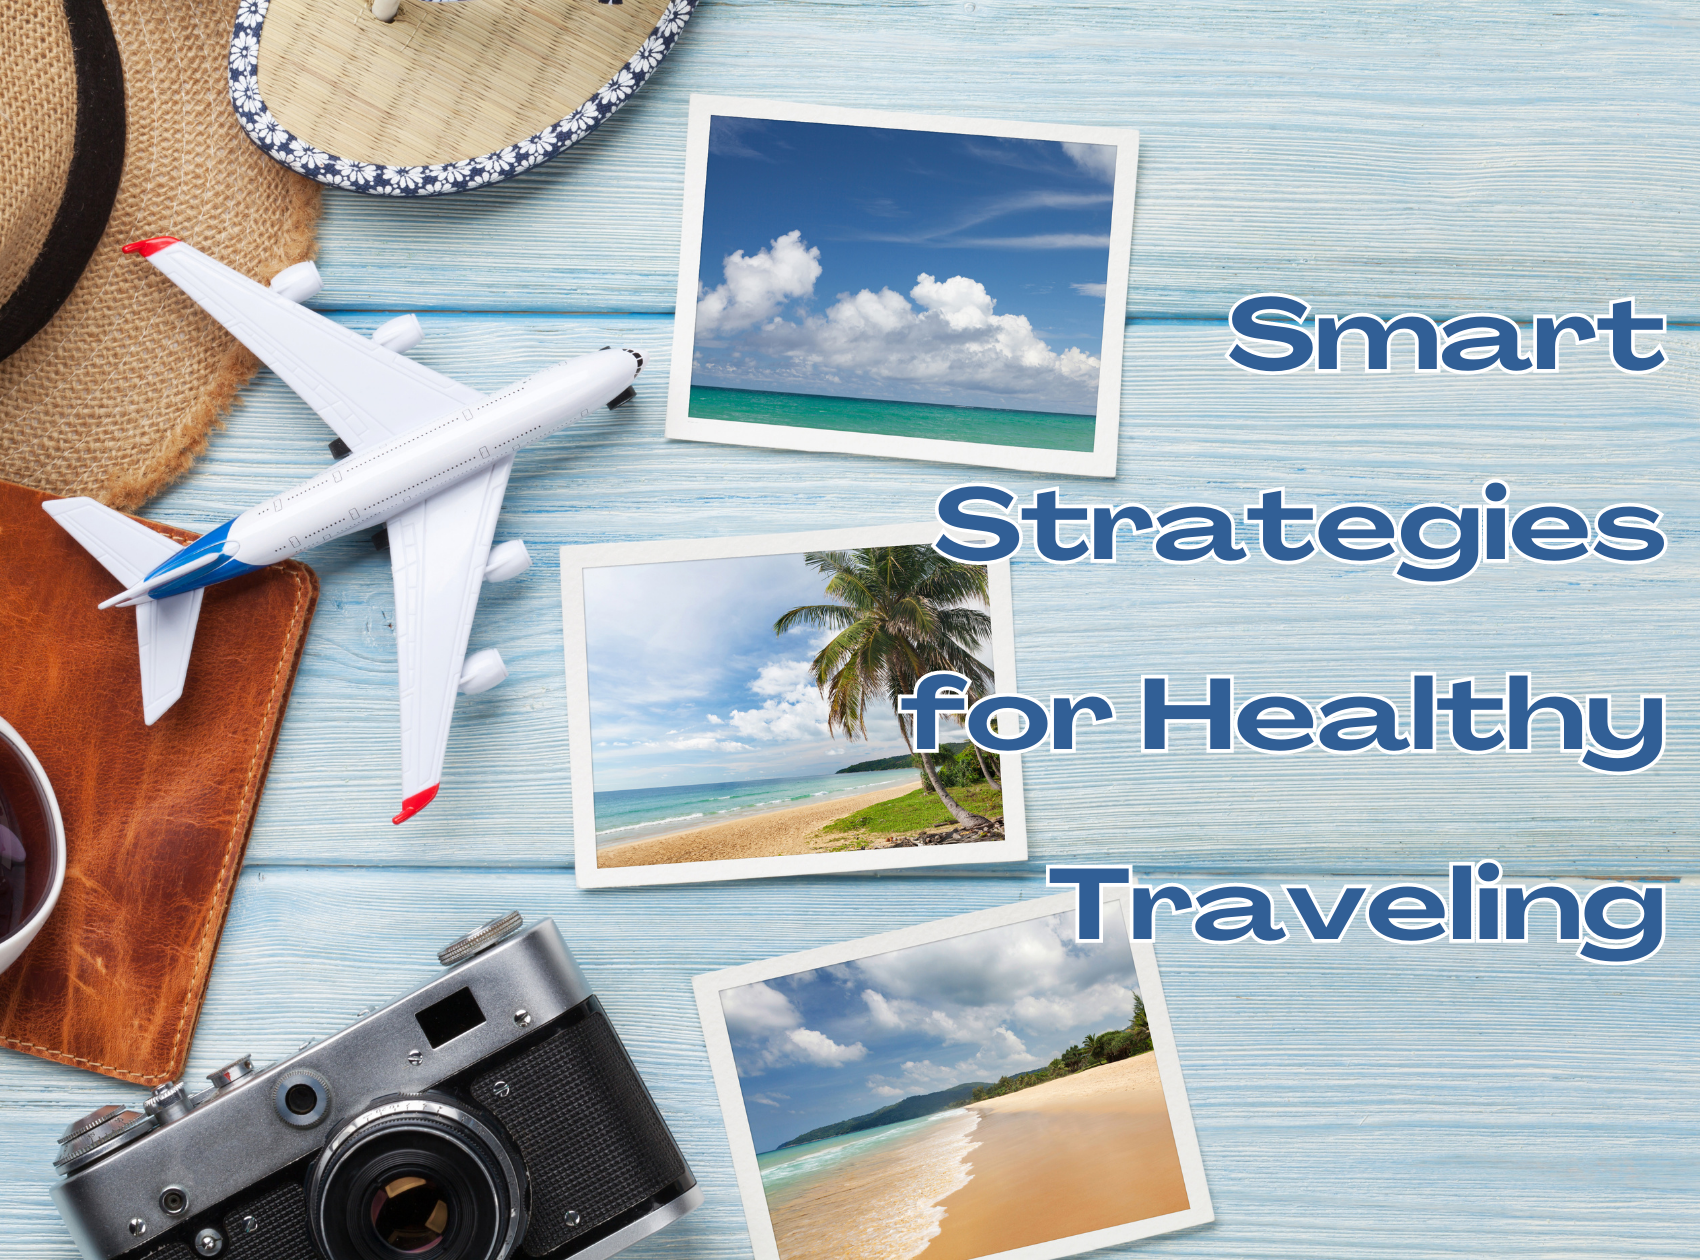 Strategies for Healthy Traveling (2200 × 1260 px) (1350 × 1080 px) (1)